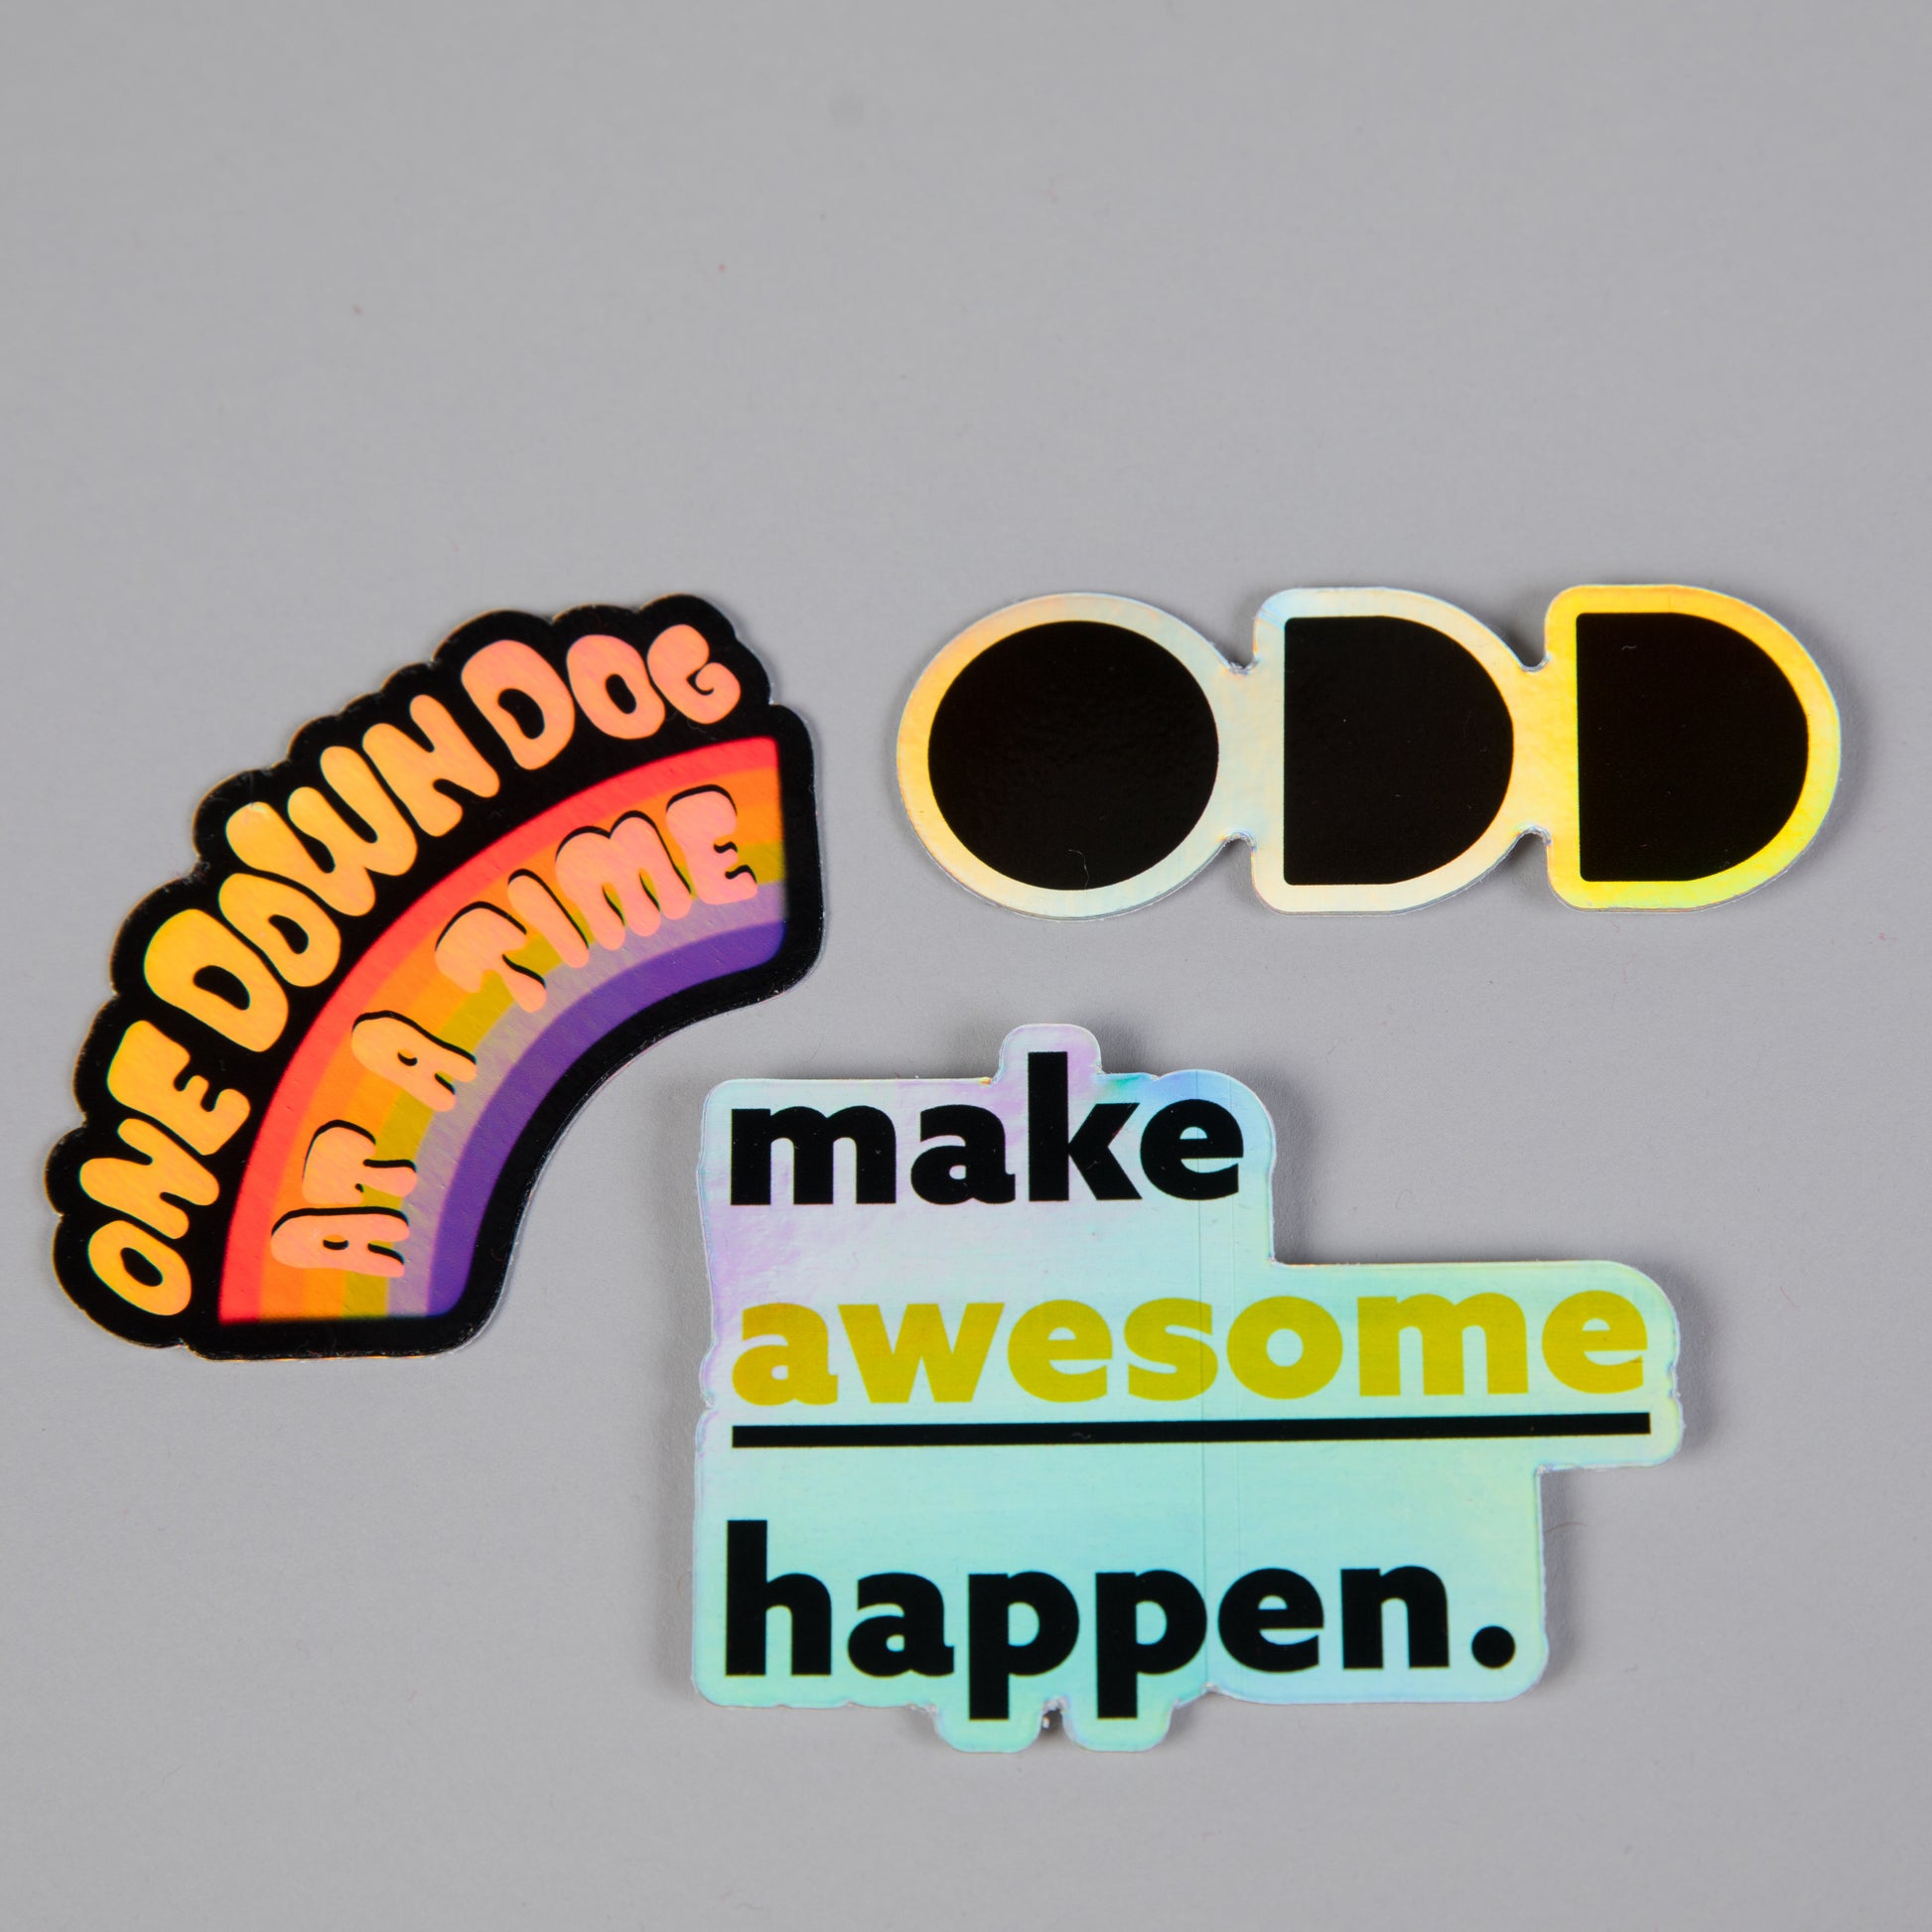 three holographic stickers saying "One down dog at a time" "ODD" and "Make Awesome Happen"